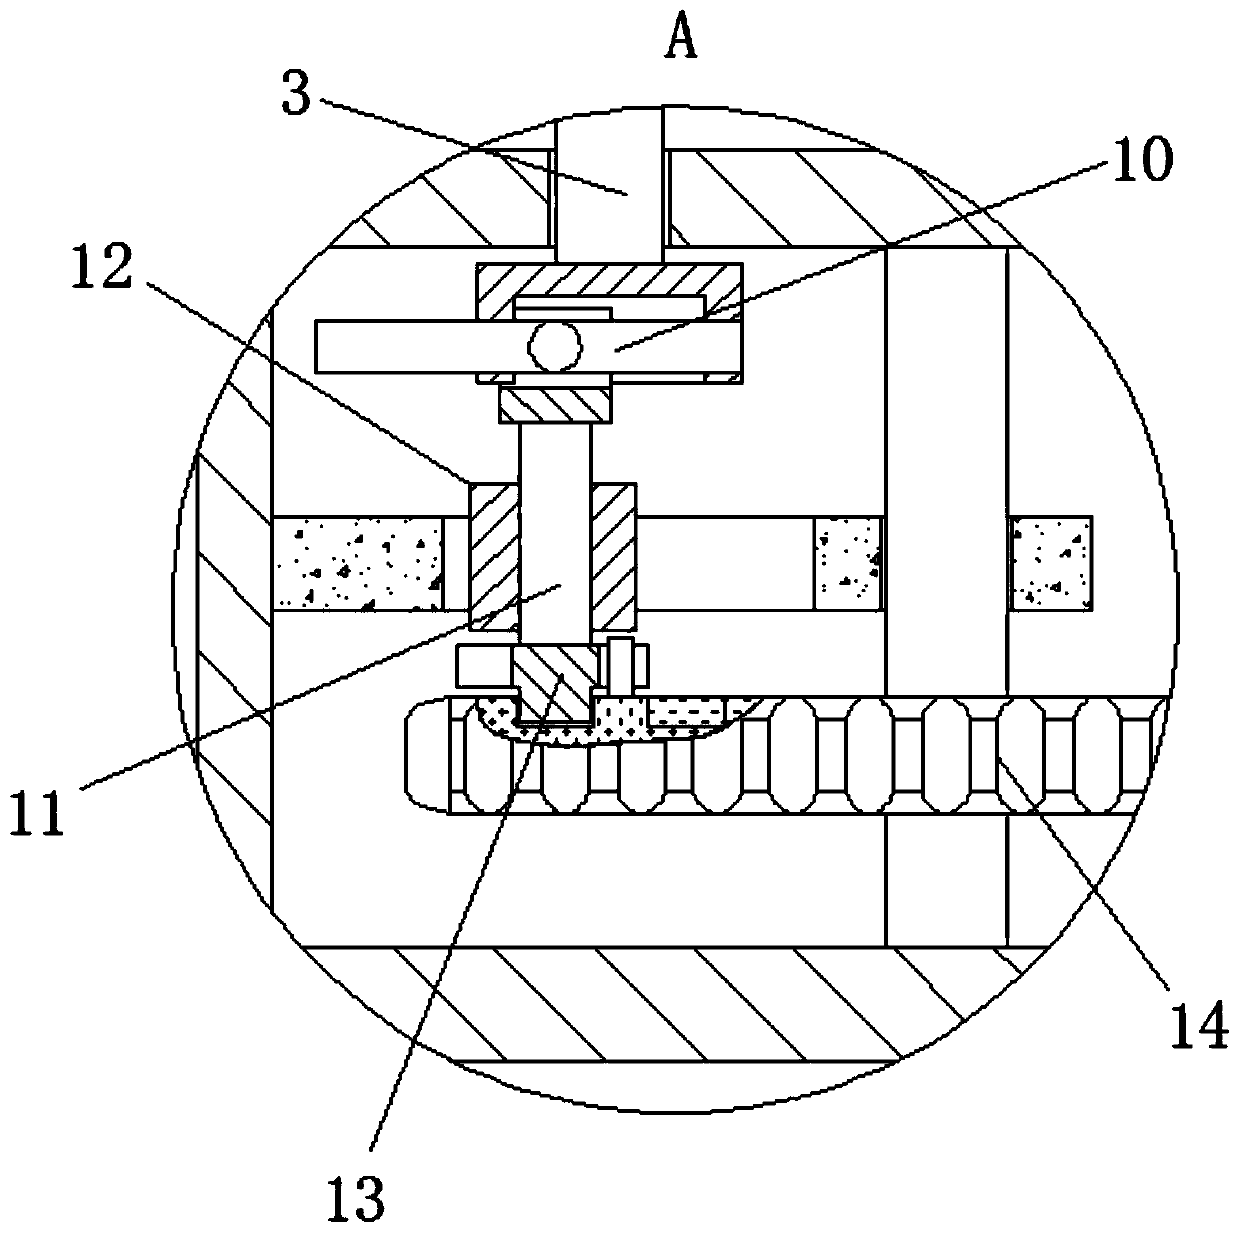 Knitwear continuous punching device based on two-way lead screw transmission principle